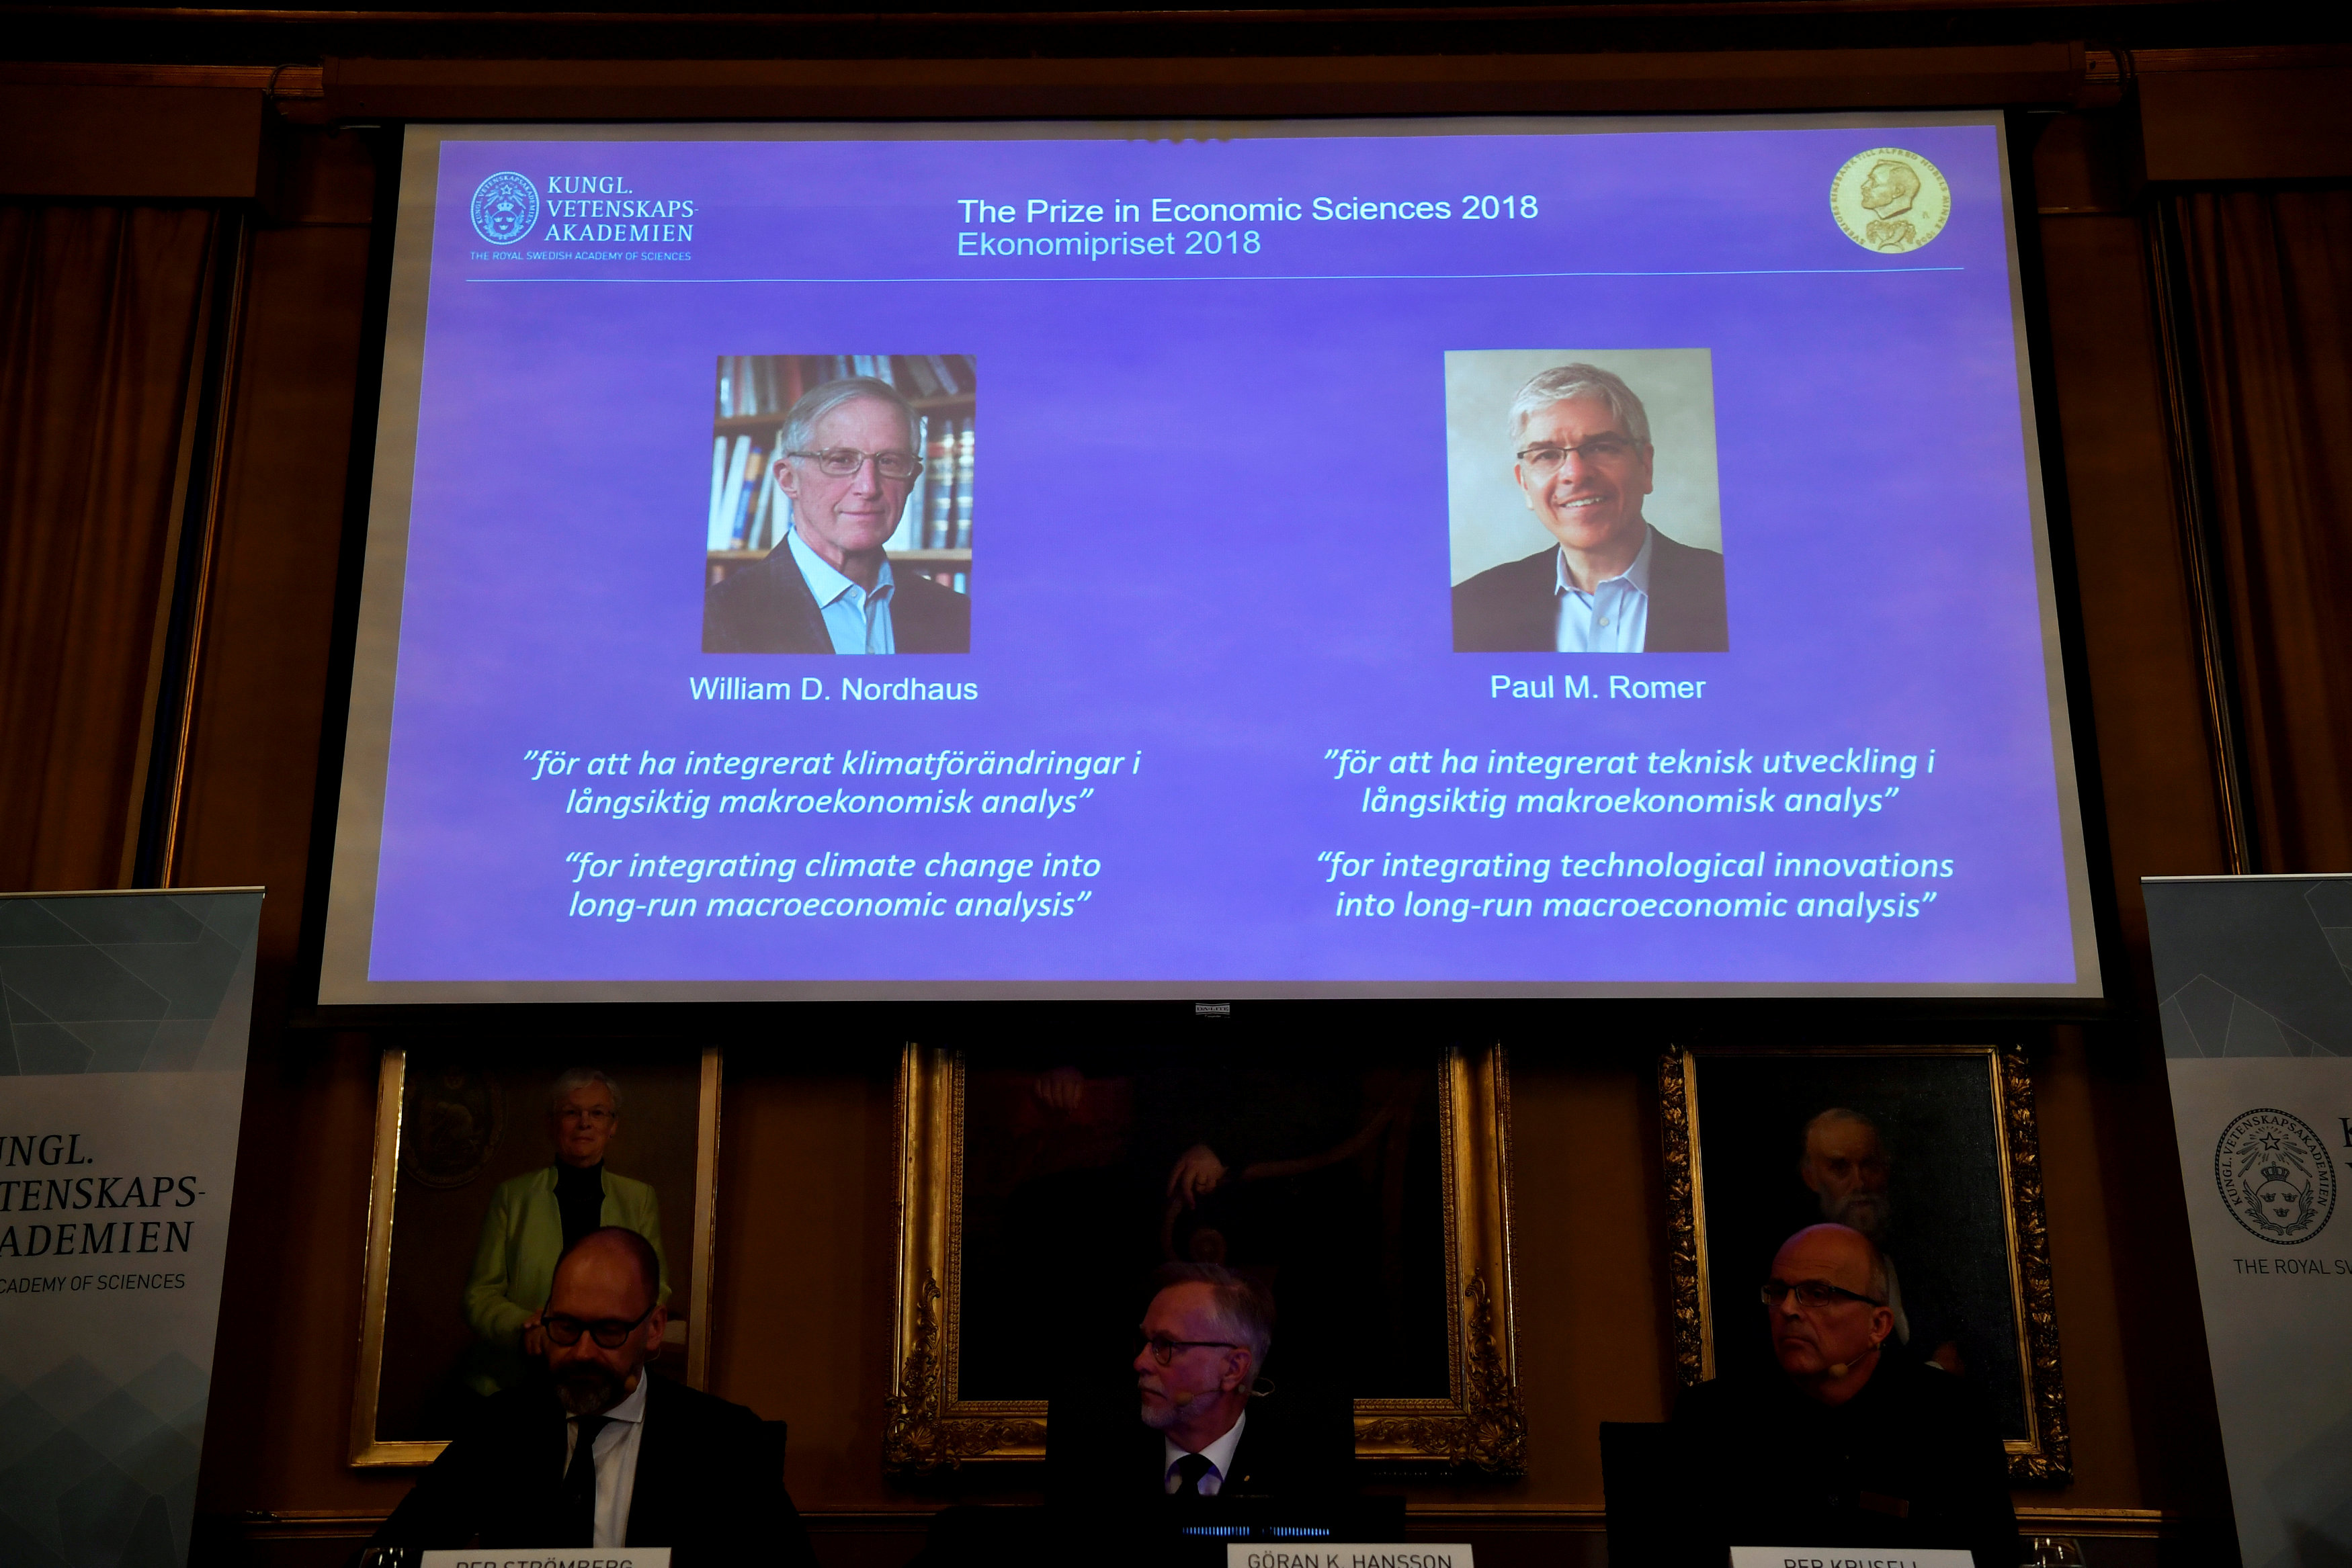 Per Stromberg, Goran K. Hansson and Per Krusell announce the laureates of the Nobel Prize in Economics during a press conference at the The Royal Swedish Academy of Sciences in Stockholm